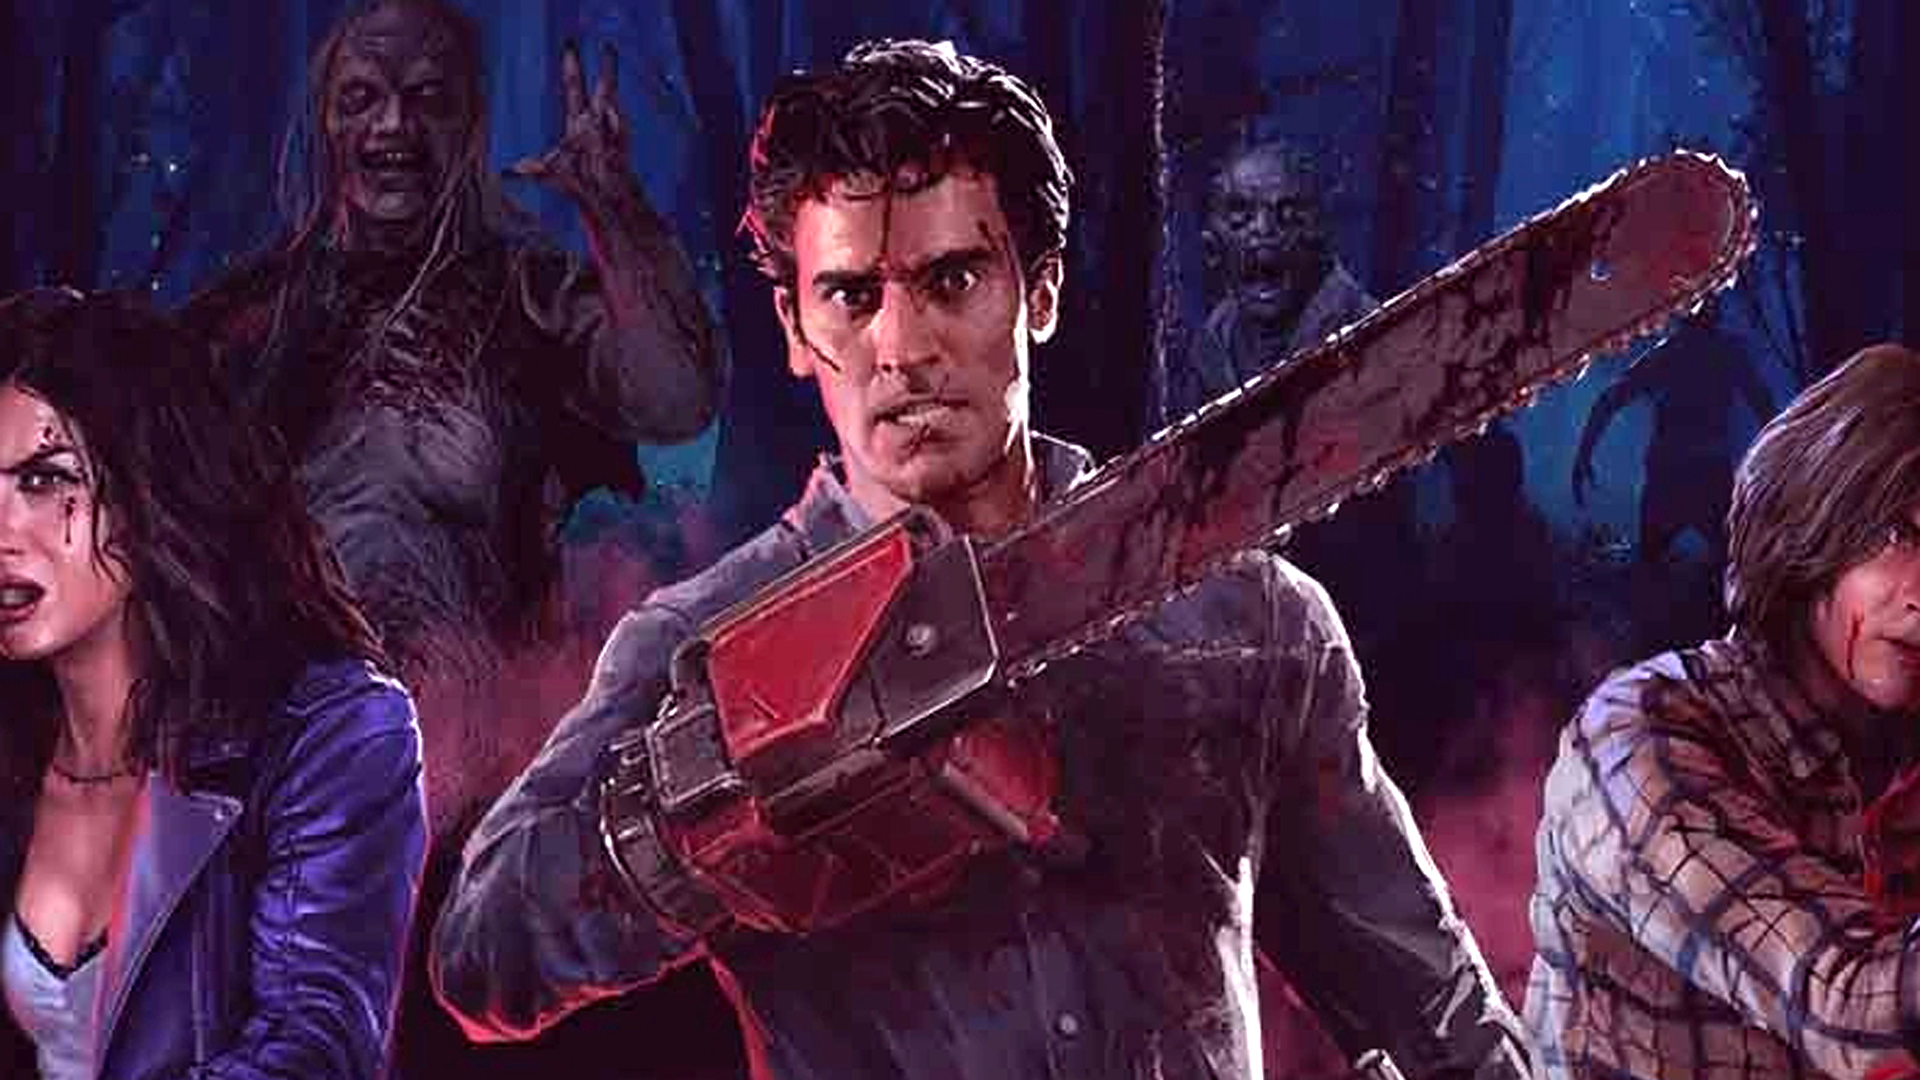 Evil Dead: The Game Delayed to February 2022, But It's Getting a  Single-Player Option